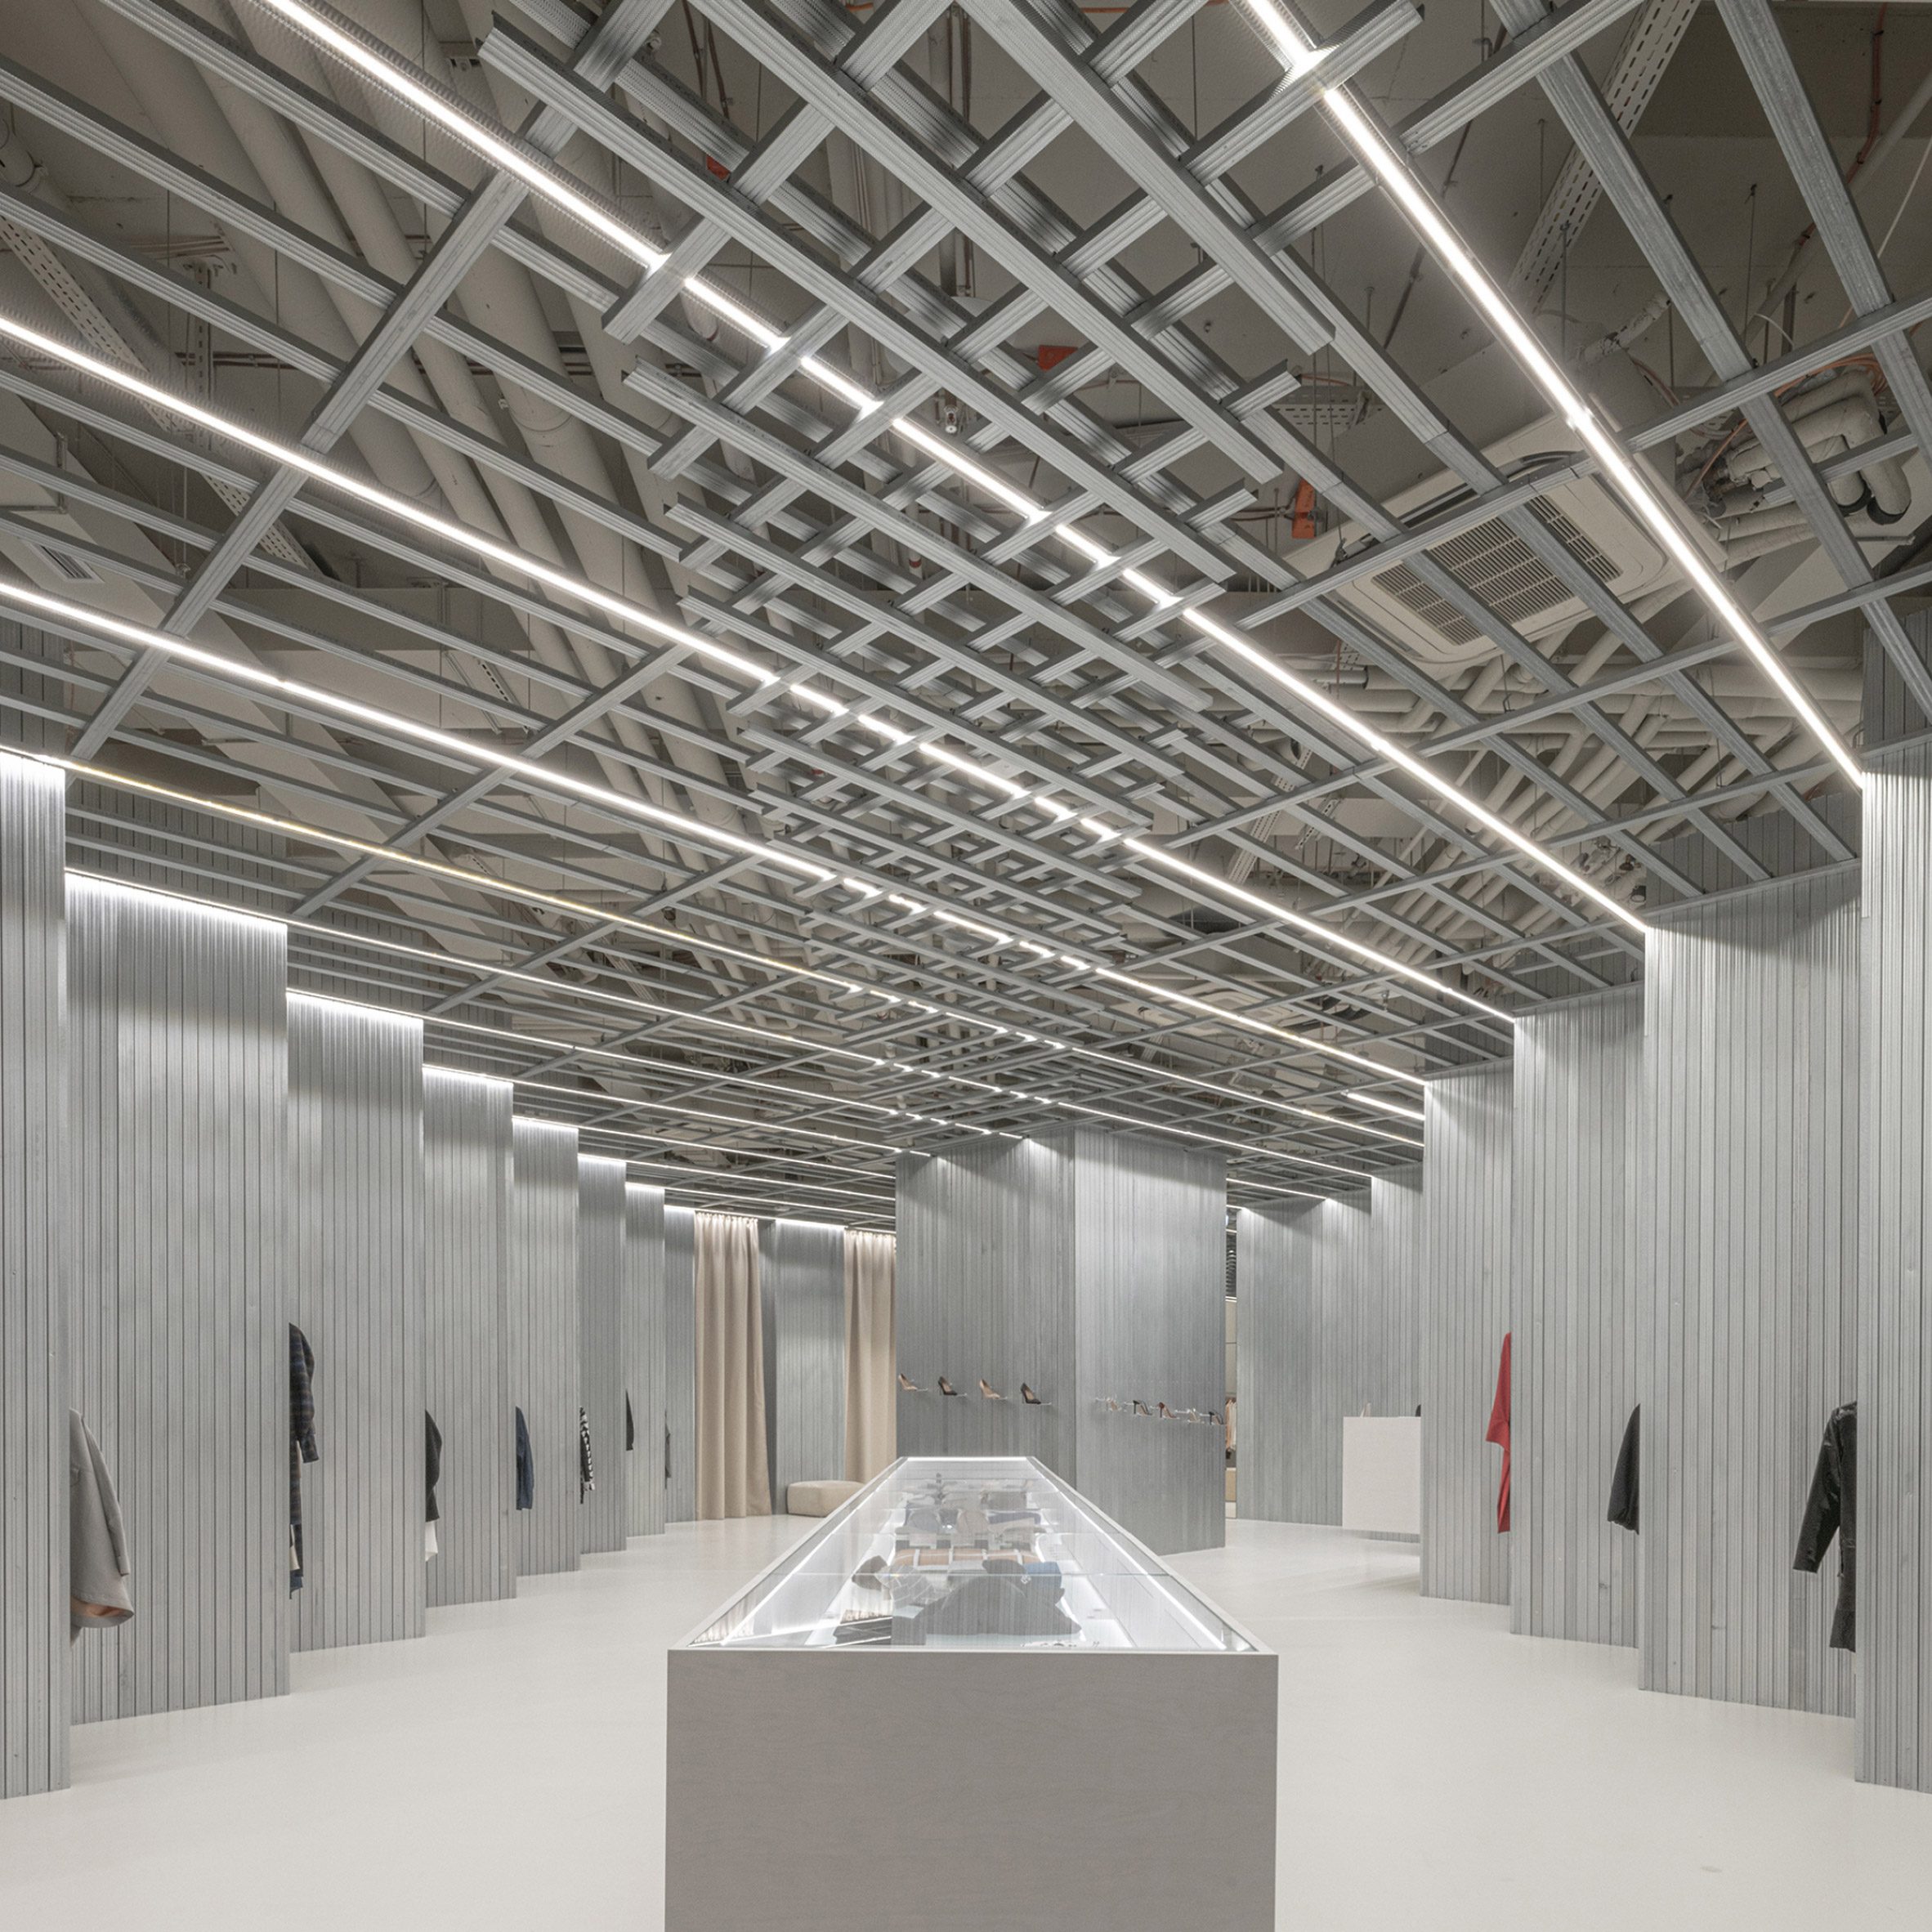 Overview of a boutique with steel partitions